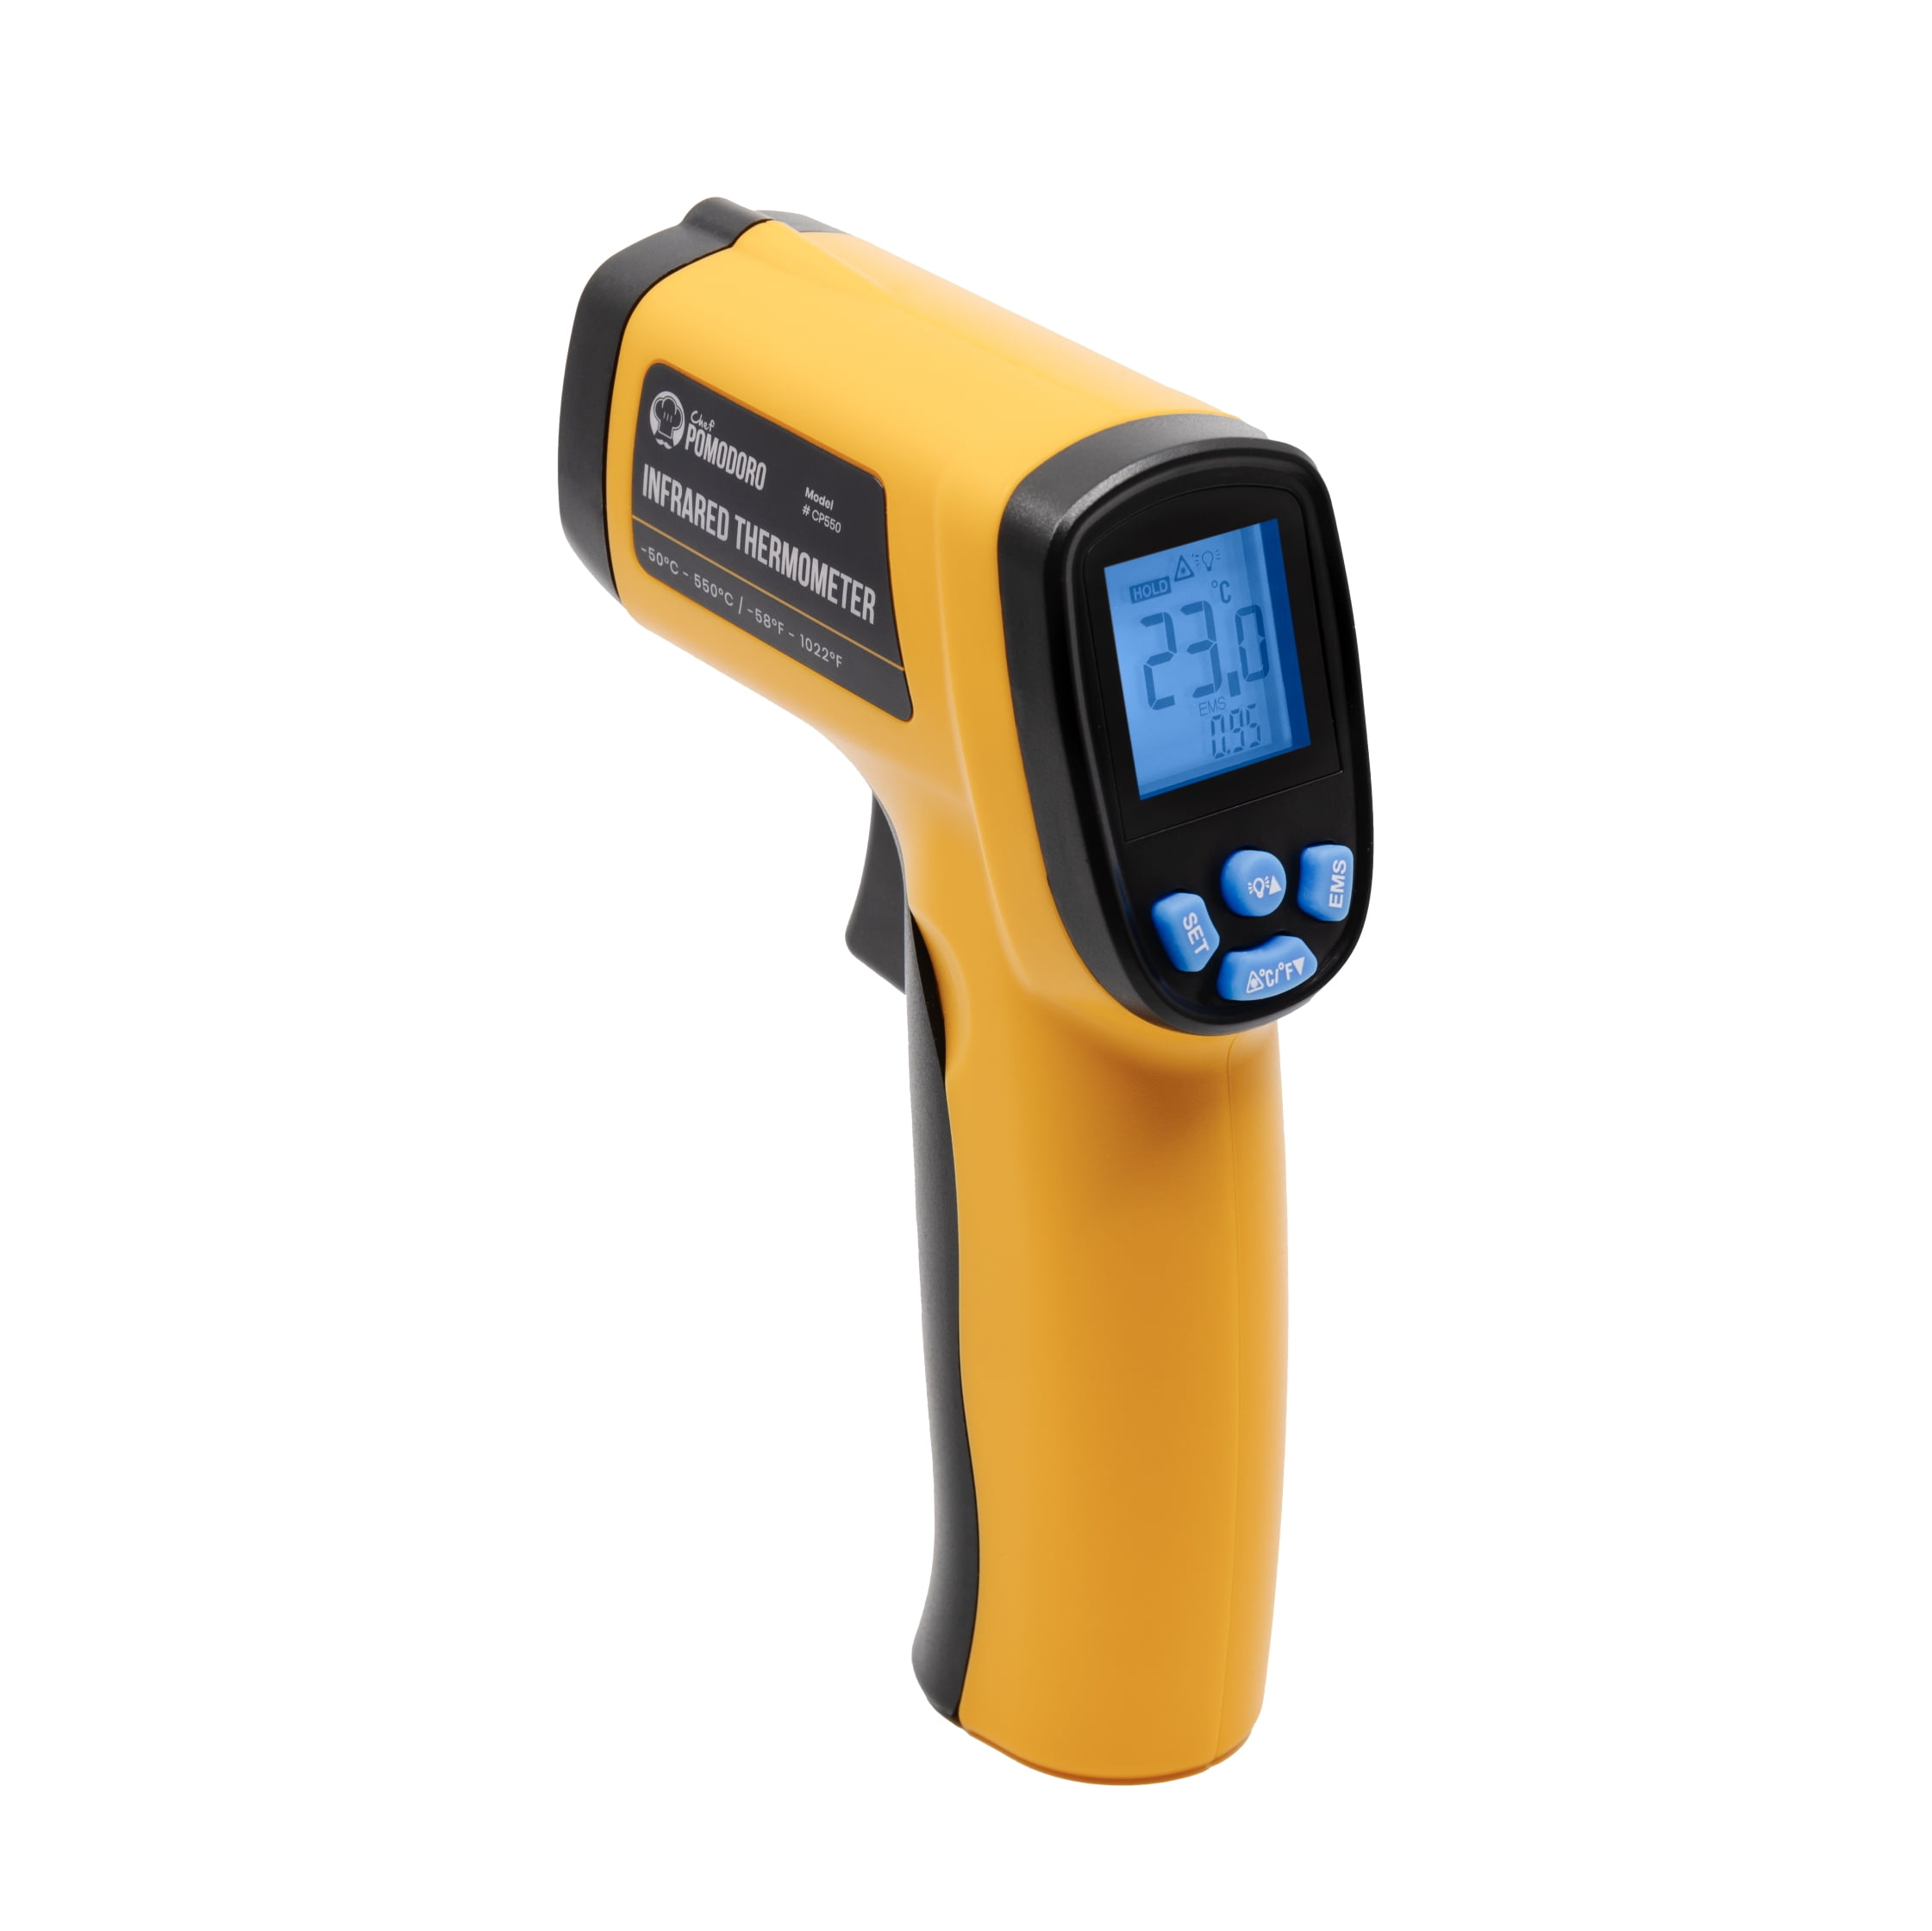 Digital Infrared Thermometer 380, No Touch Digital Laser Temperature Gun  for Cooking/BBQ/Meat, For gifts 